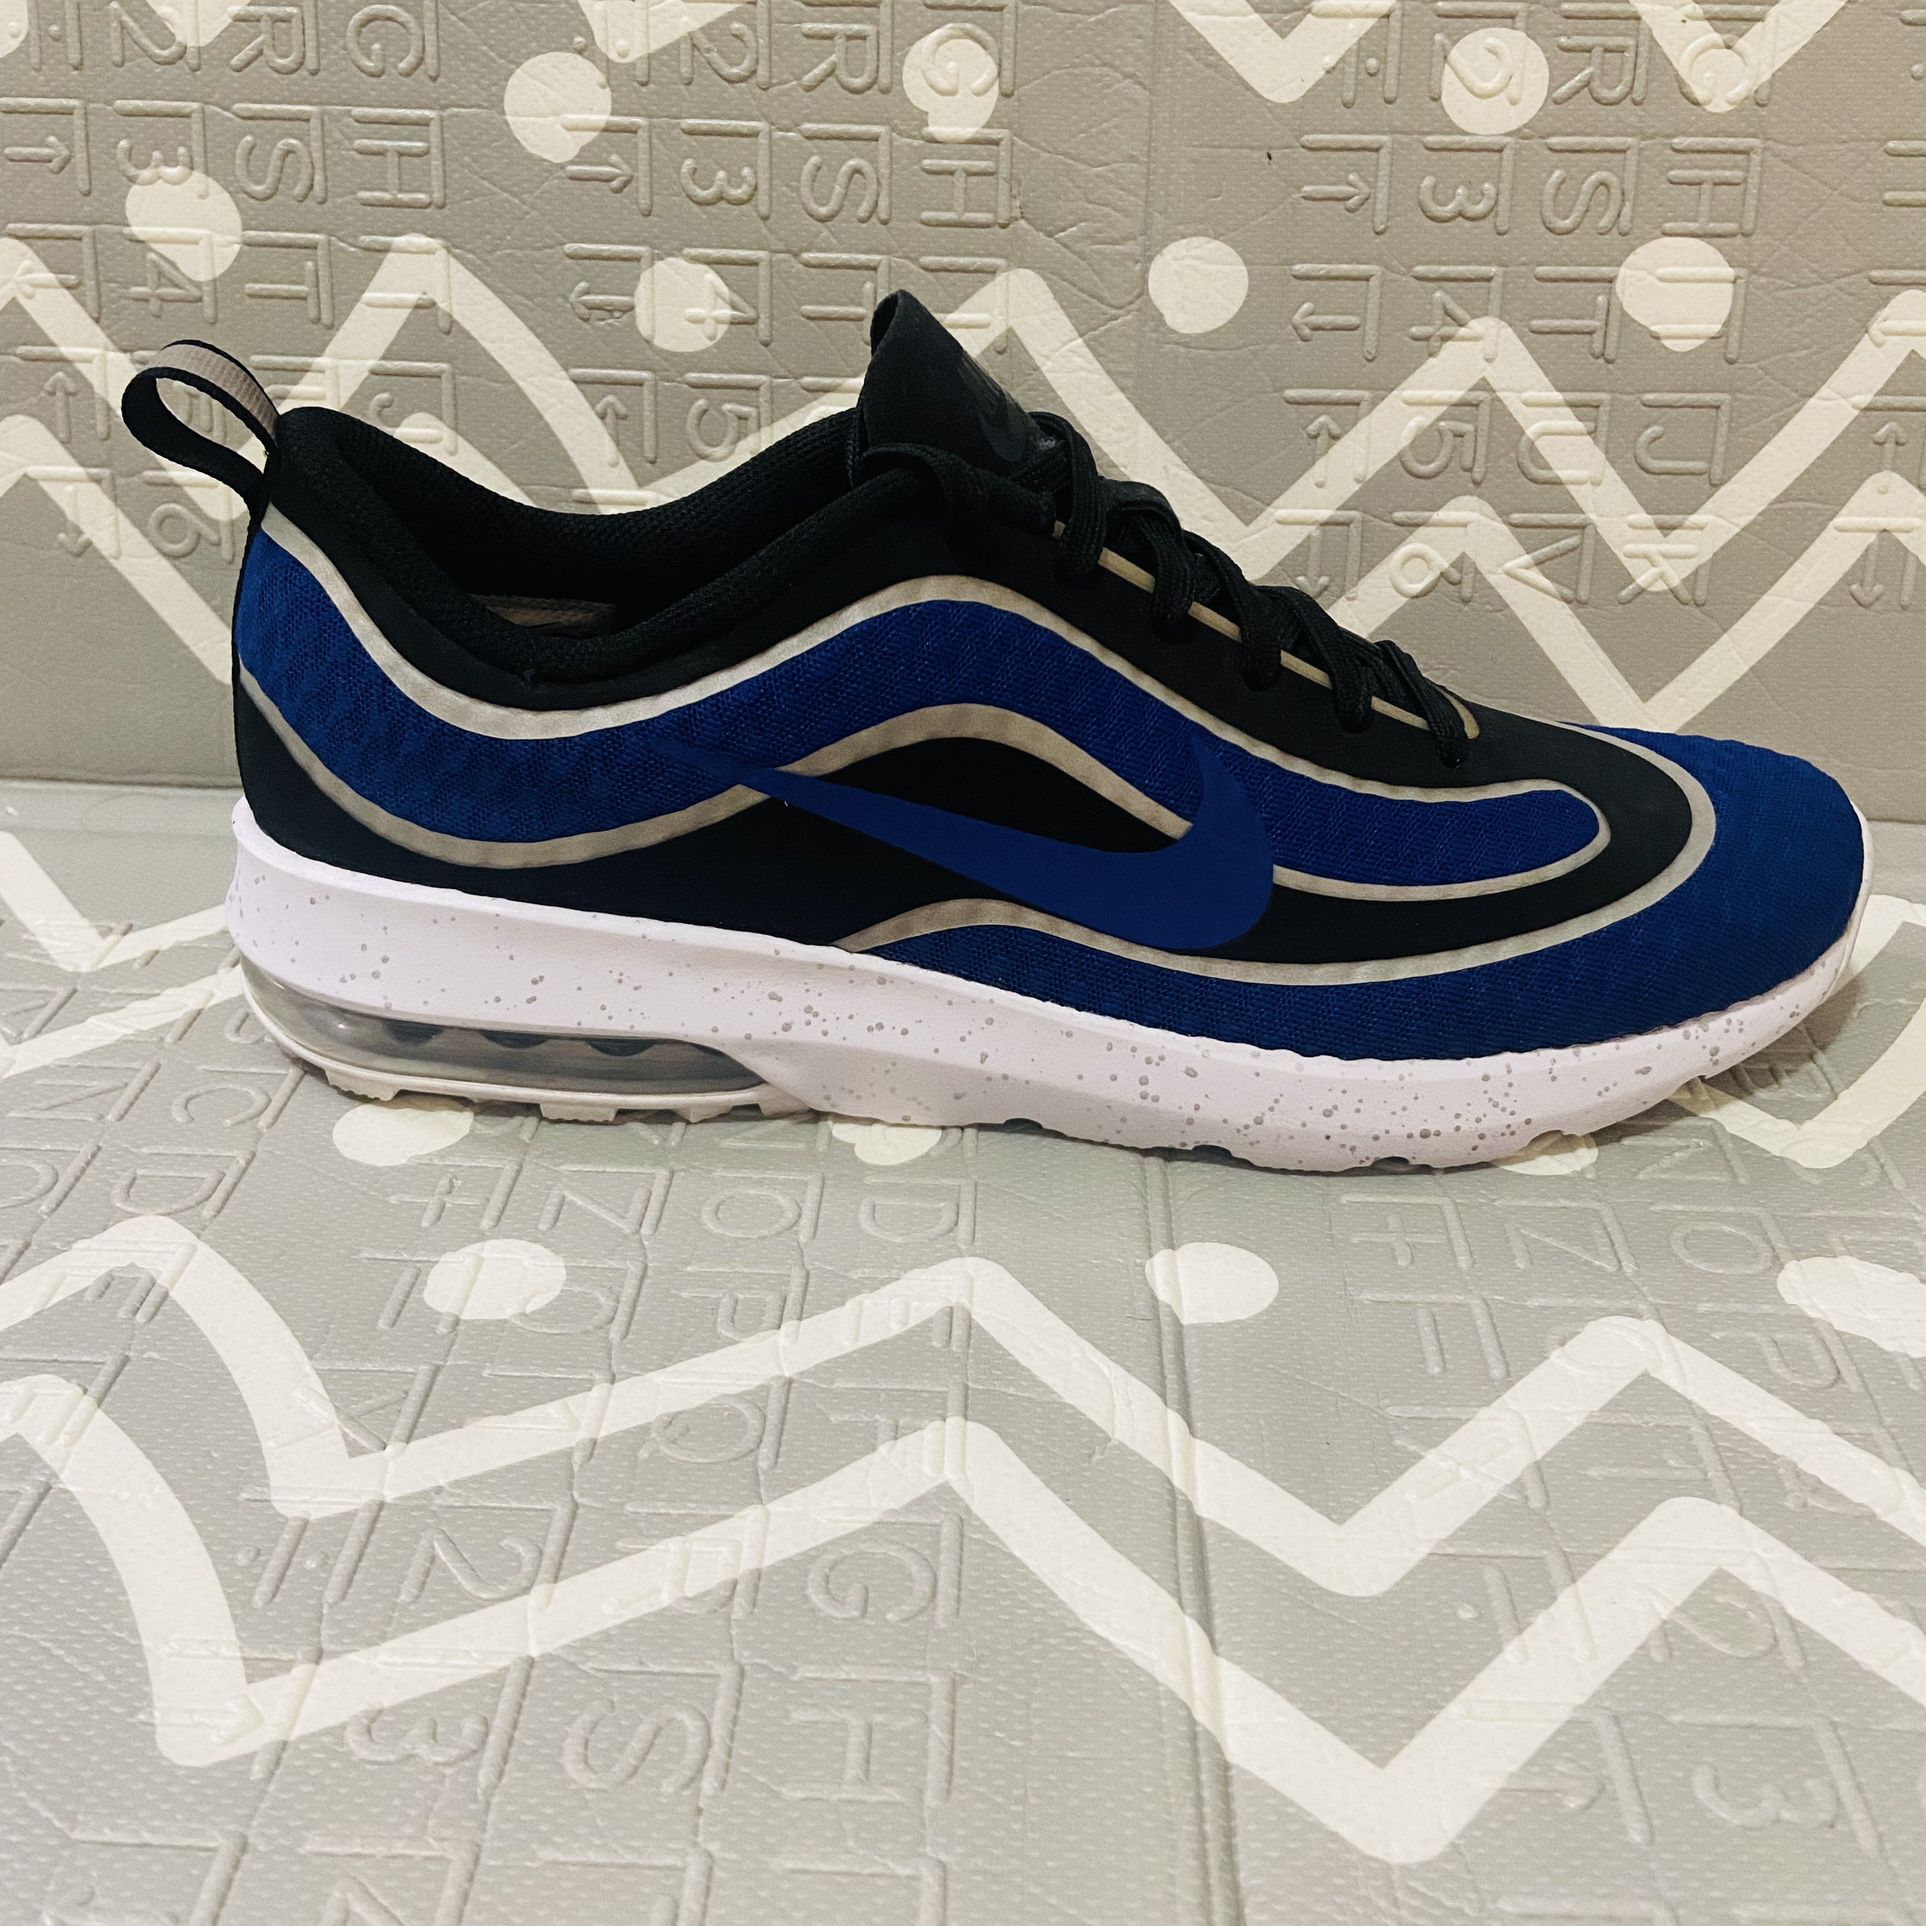 Nike Mercurial Max 98 R9 Shoes for Sale New York, NY - OfferUp